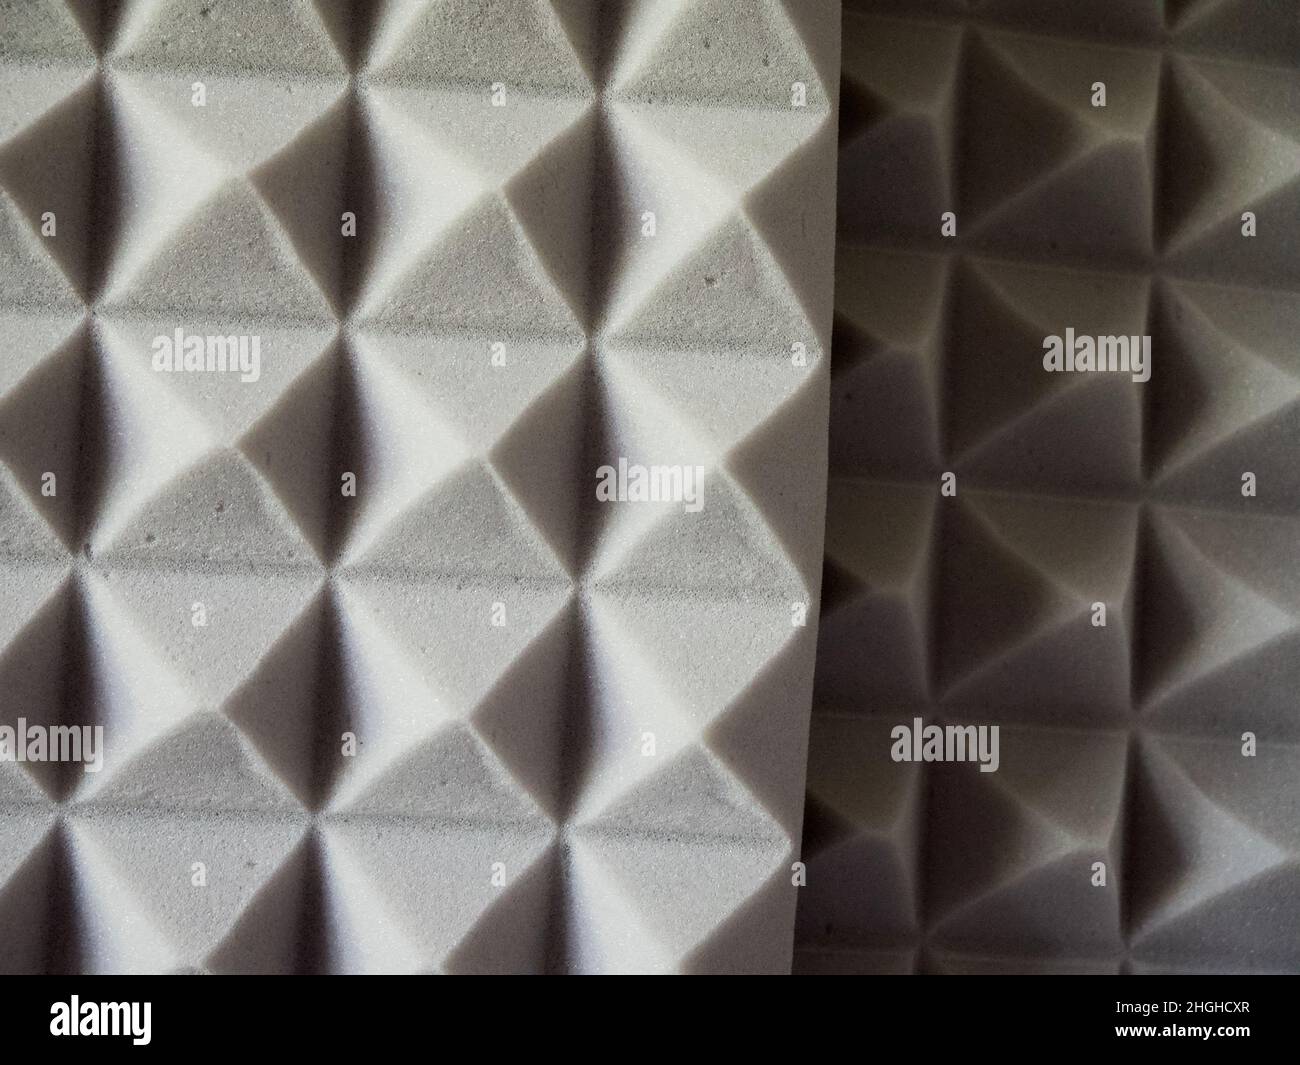 Plates of gray soundproof foam rubber. Sound-absorbing material. Stock Photo